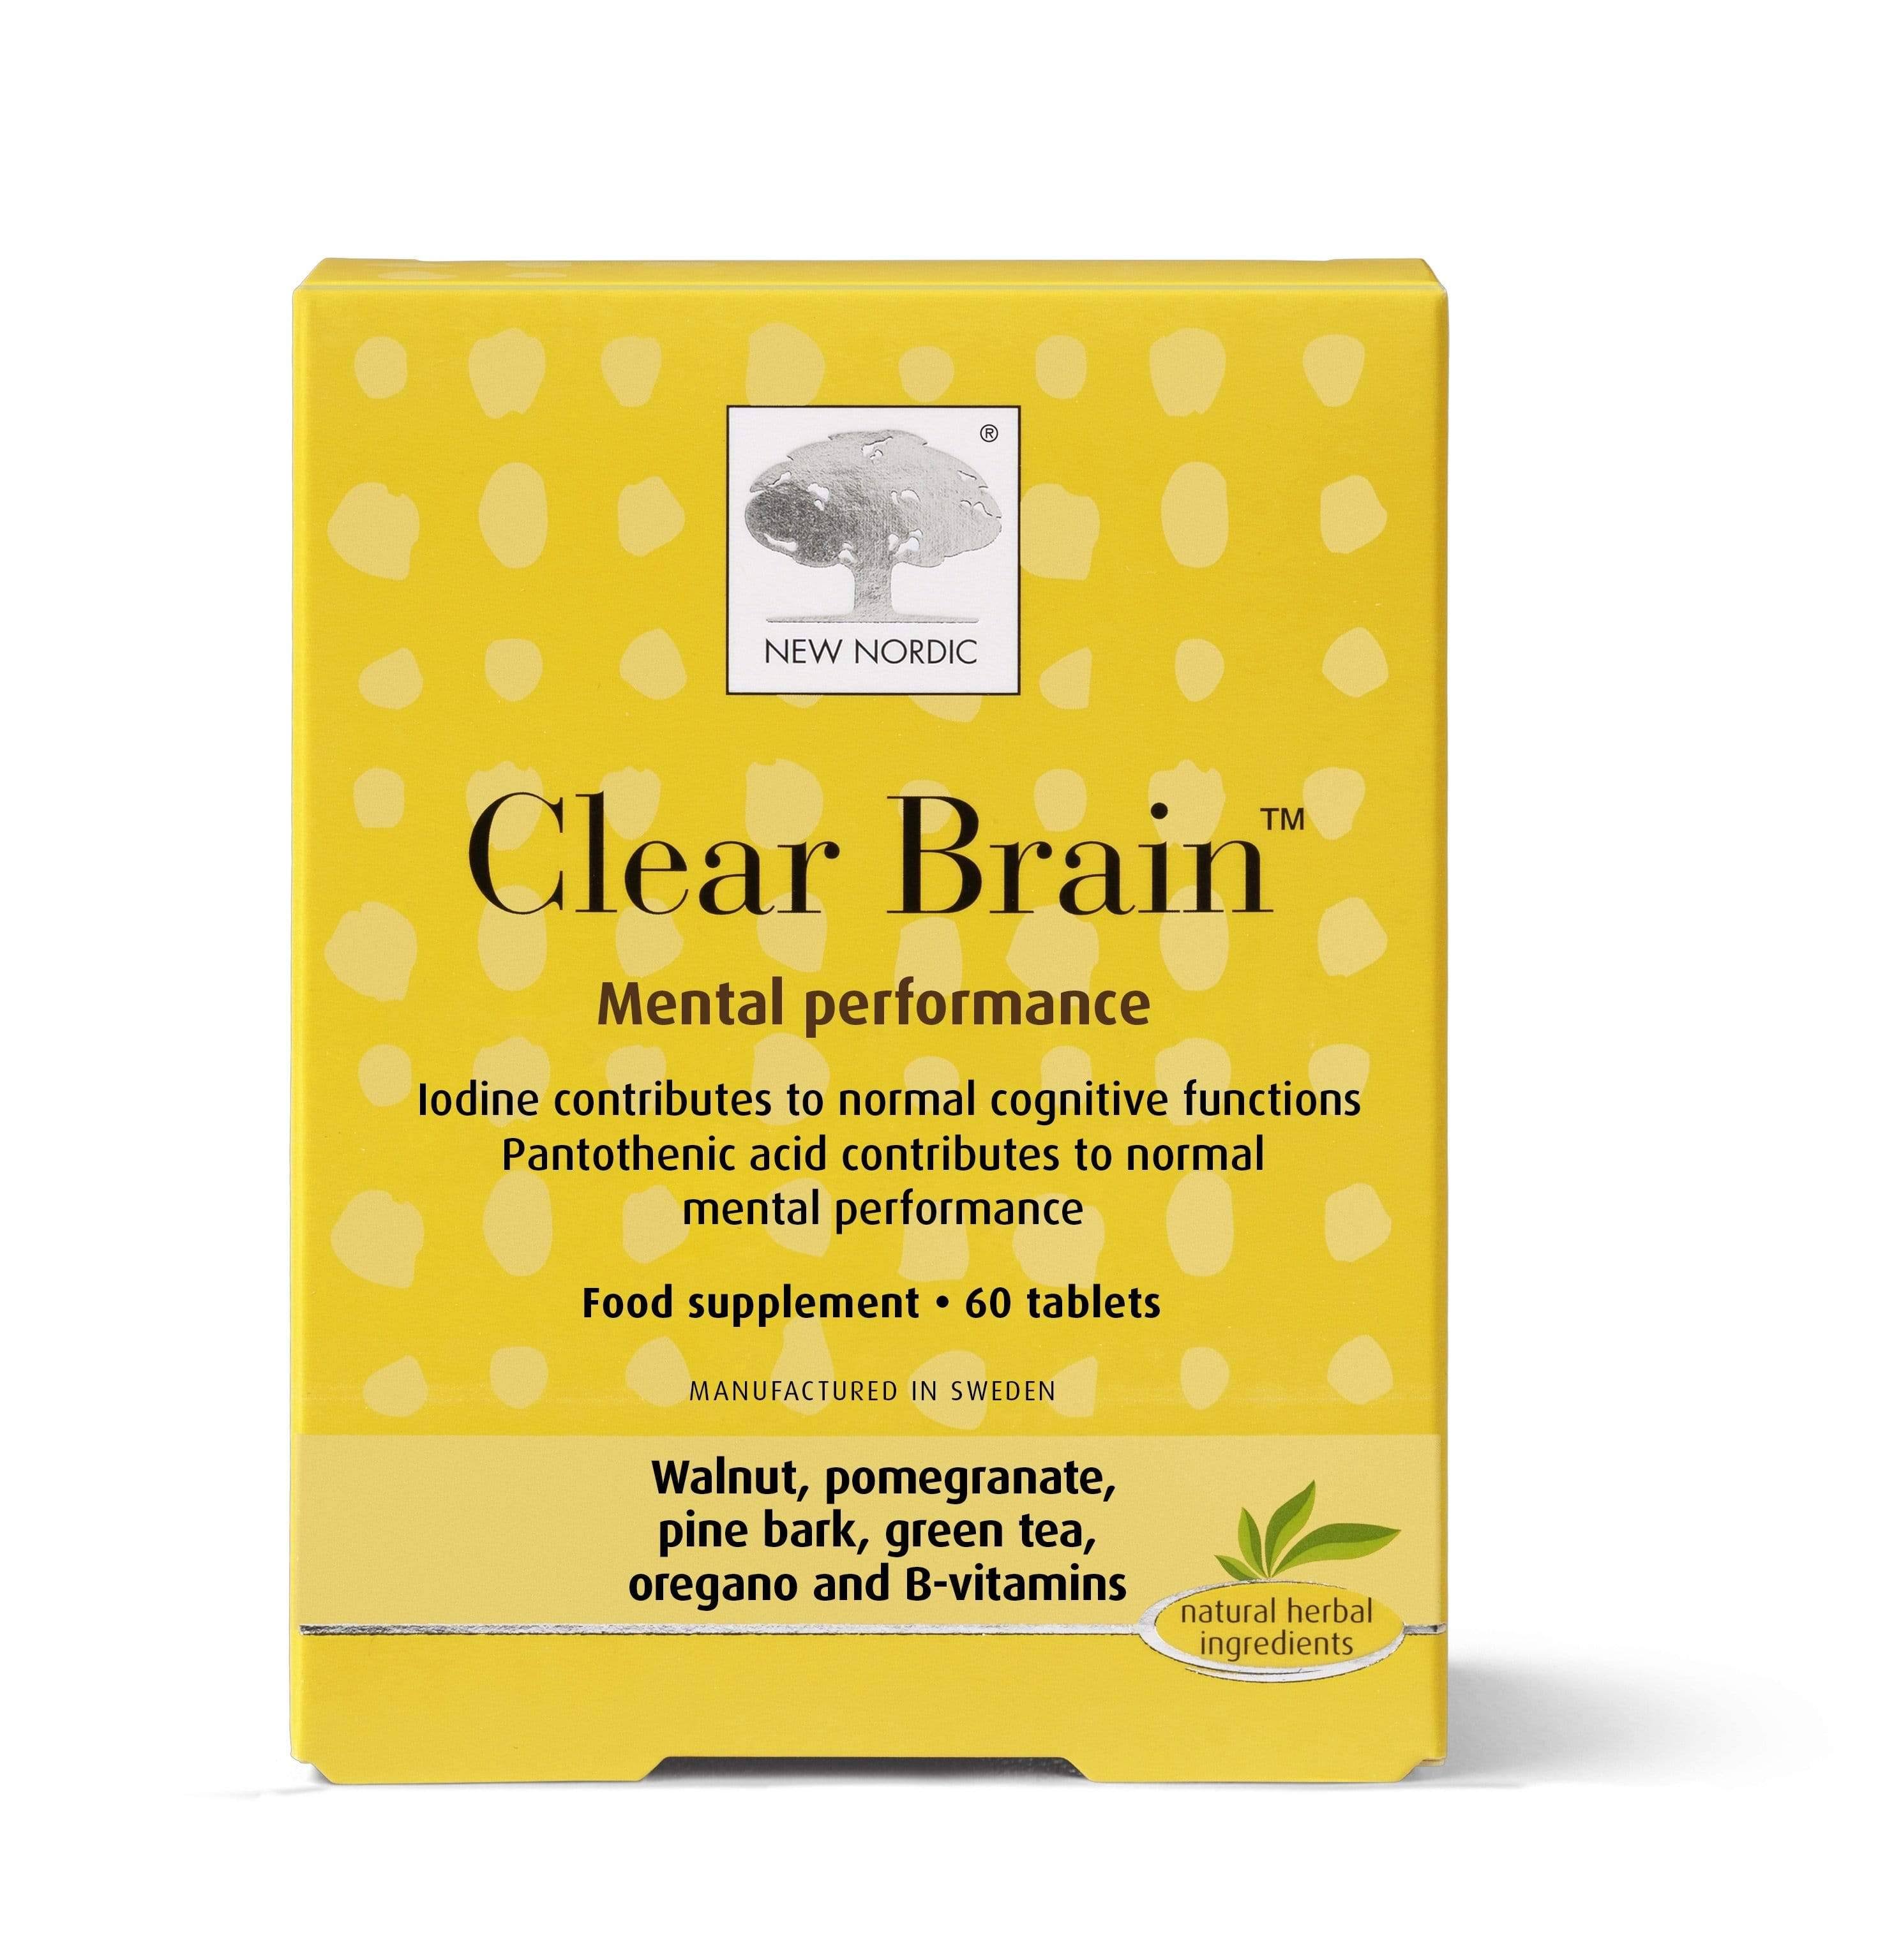 New Nordic Clear Brain Mental Performance Food Supplement - 26g, 60ct